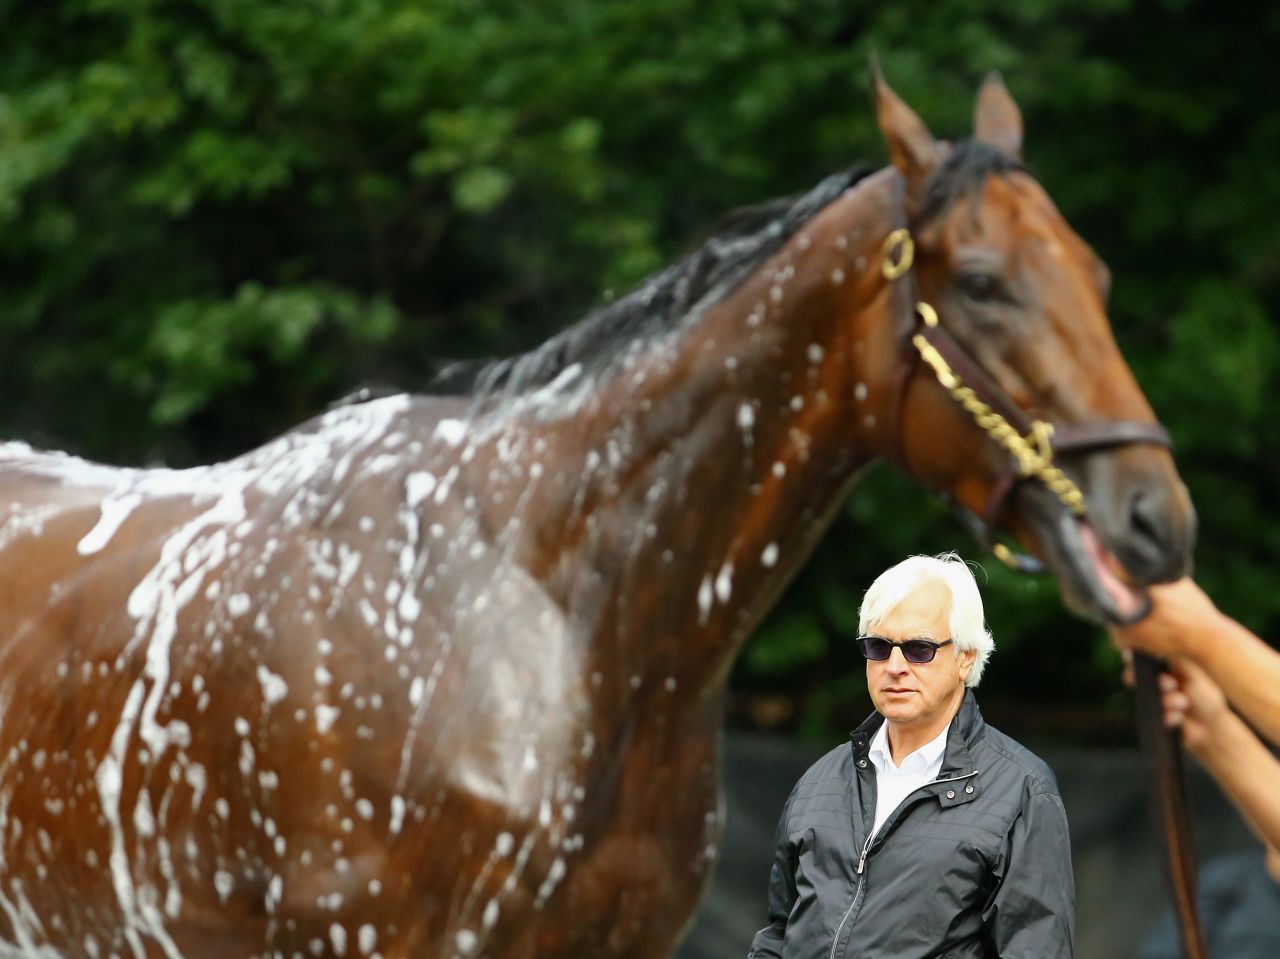 But after consulting with trainer Bob Baffert, Zayat has entered the horse for the $5 million Classic, the richest race in the U.S.